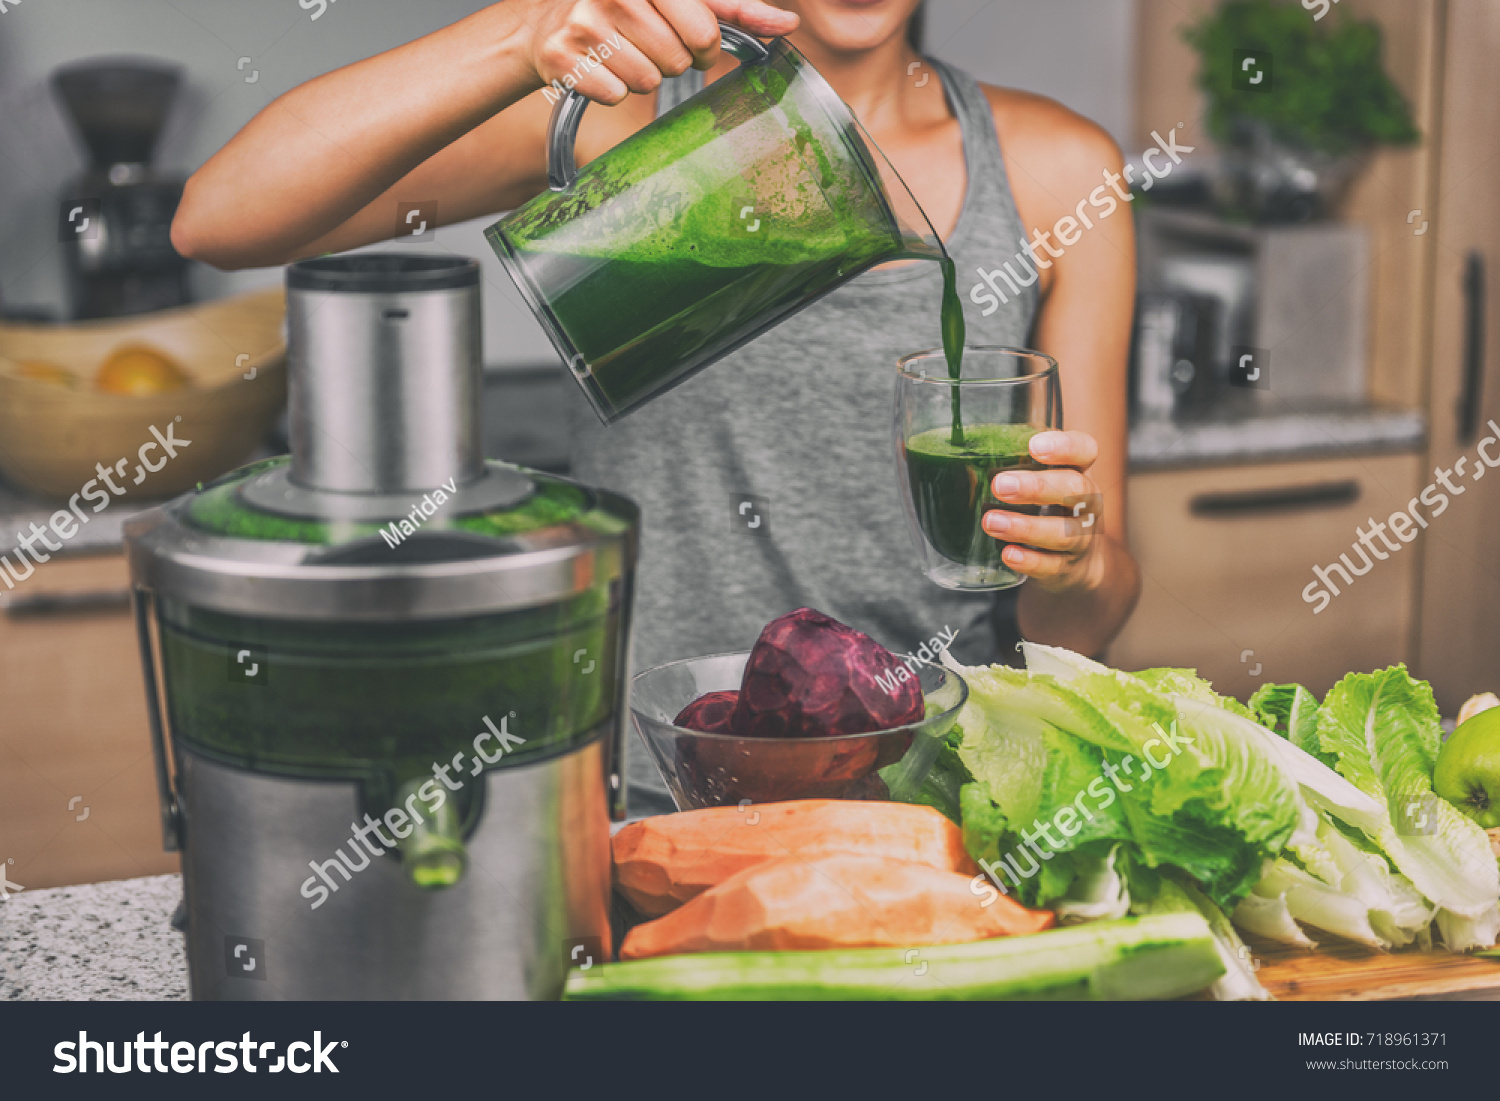 Woman juicing making green juice with juice machine in home kitchen. Healthy detox vegan diet with vegetable cold pressed extractor to extract nutrients for smoothie drink. #718961371